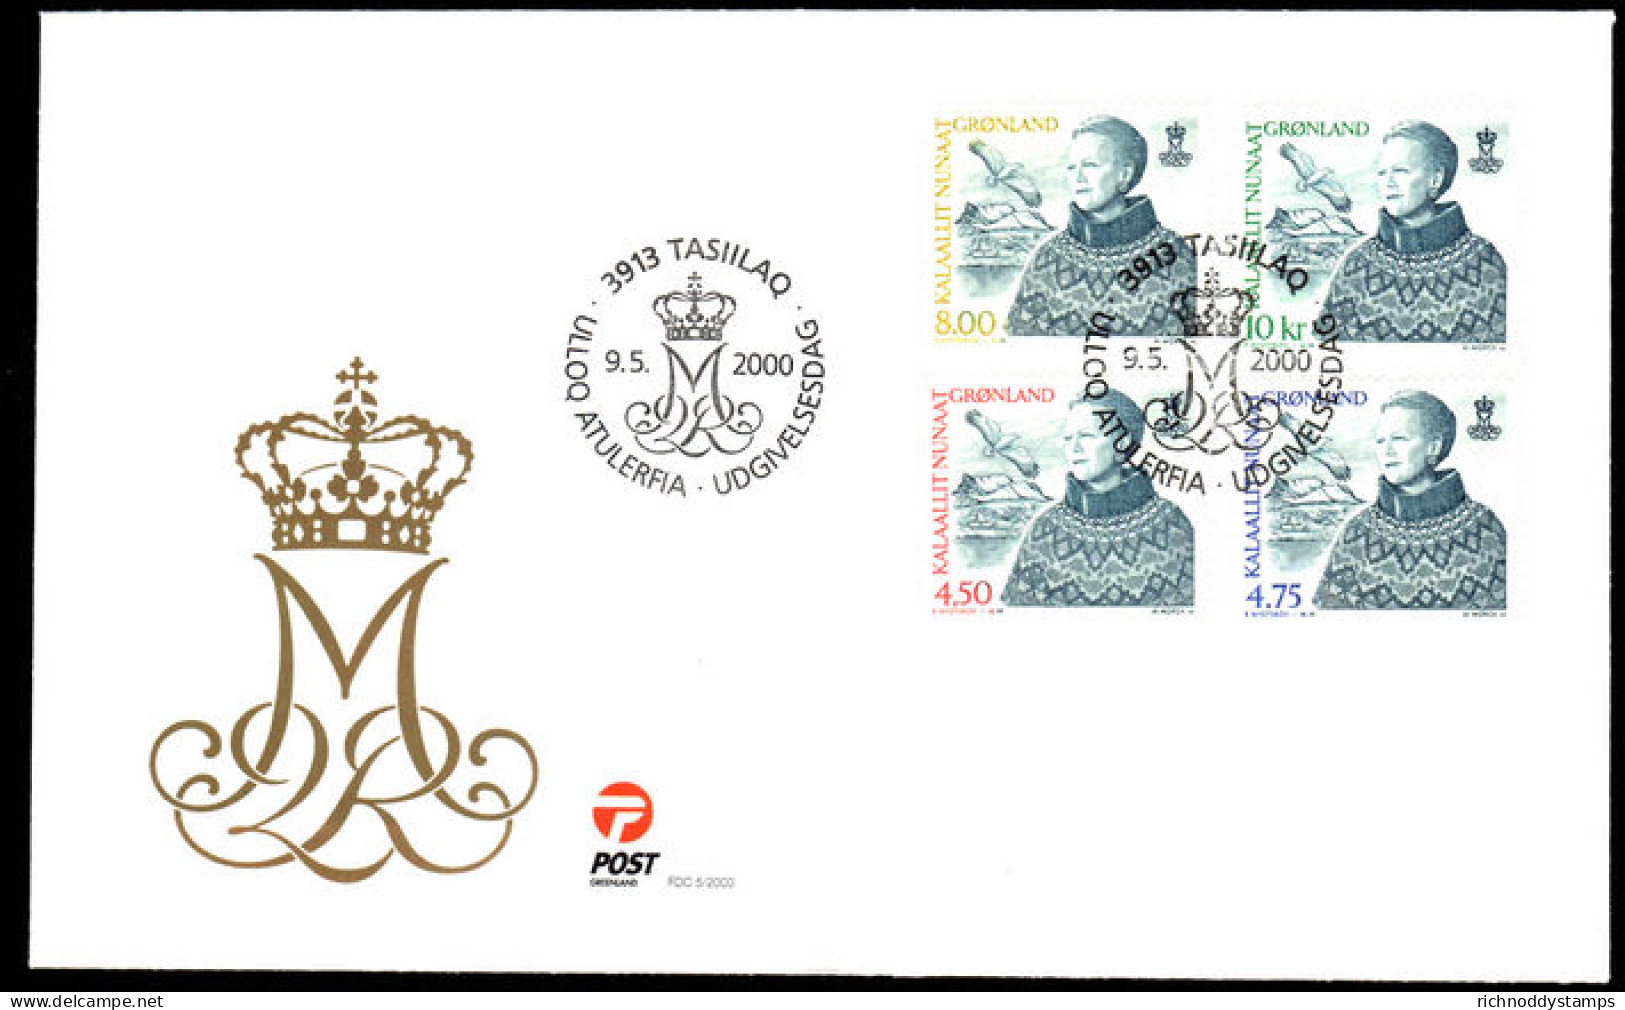 Greenland 2000 Margrethe 2000 Values First Day Cover - Covers & Documents